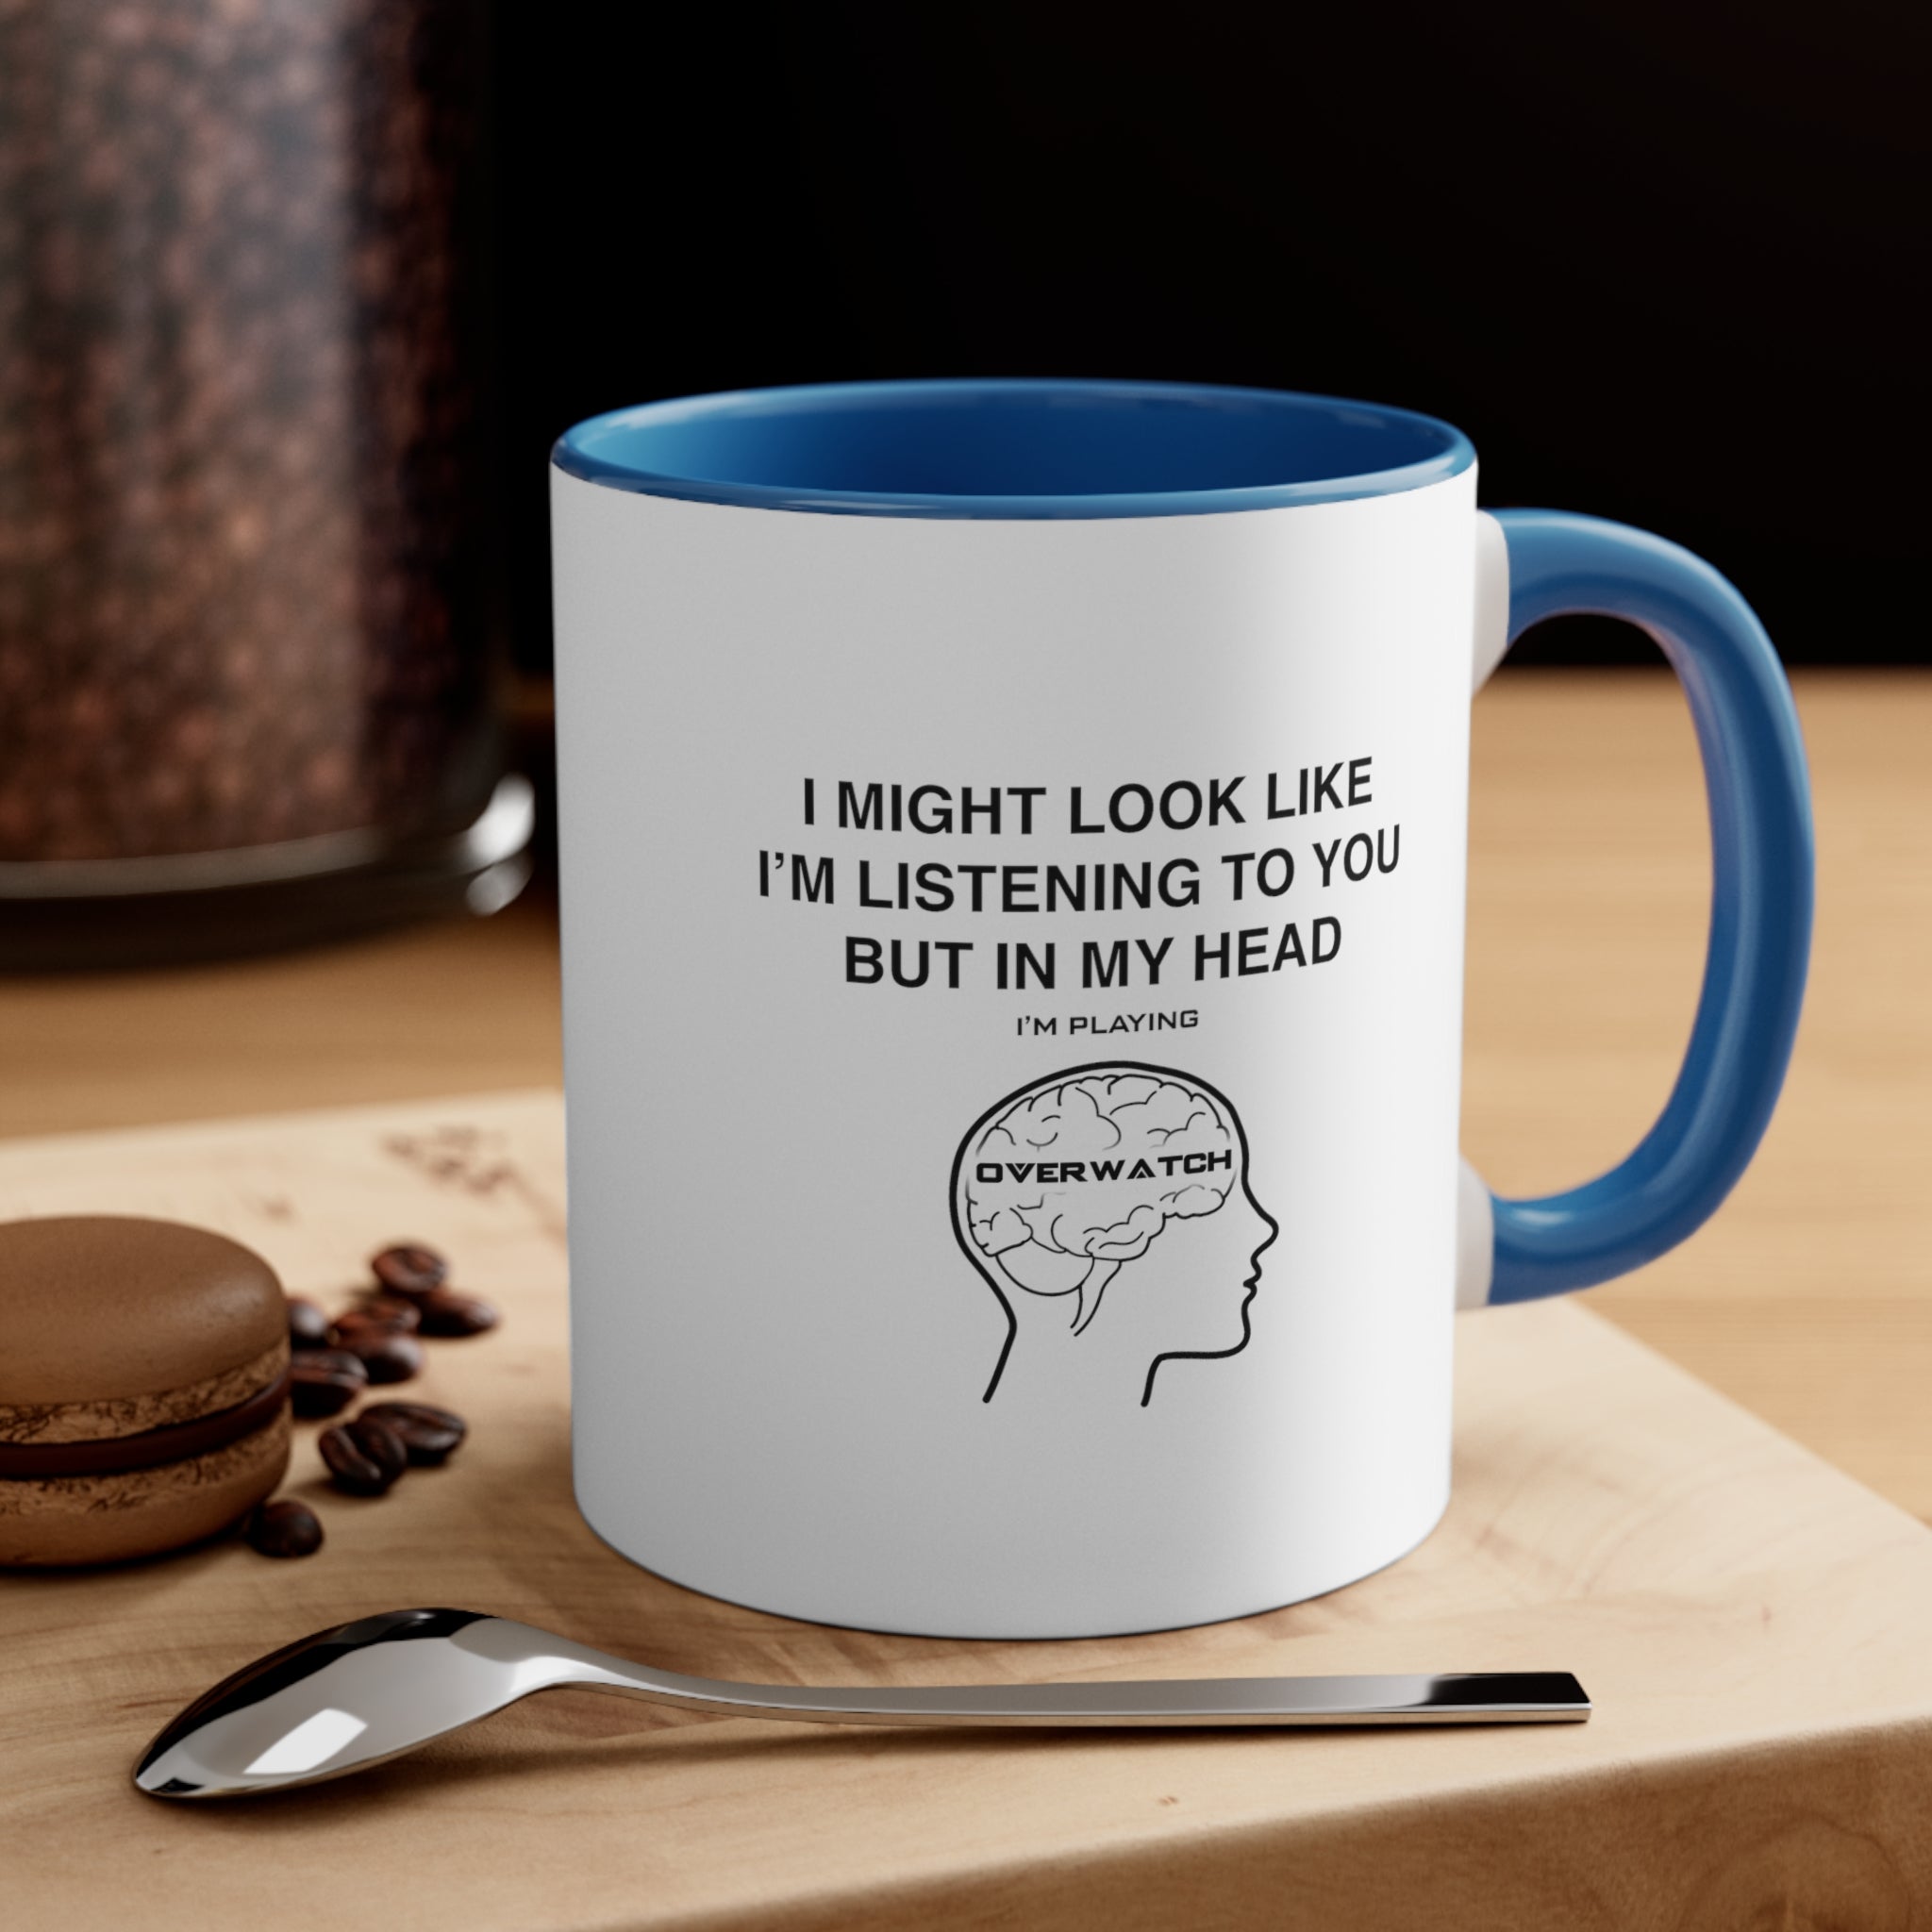 Overwatch I Might Look Like I'm Listening To You But In My Head I'm Playing Overwatch Coffee Mug, 11oz